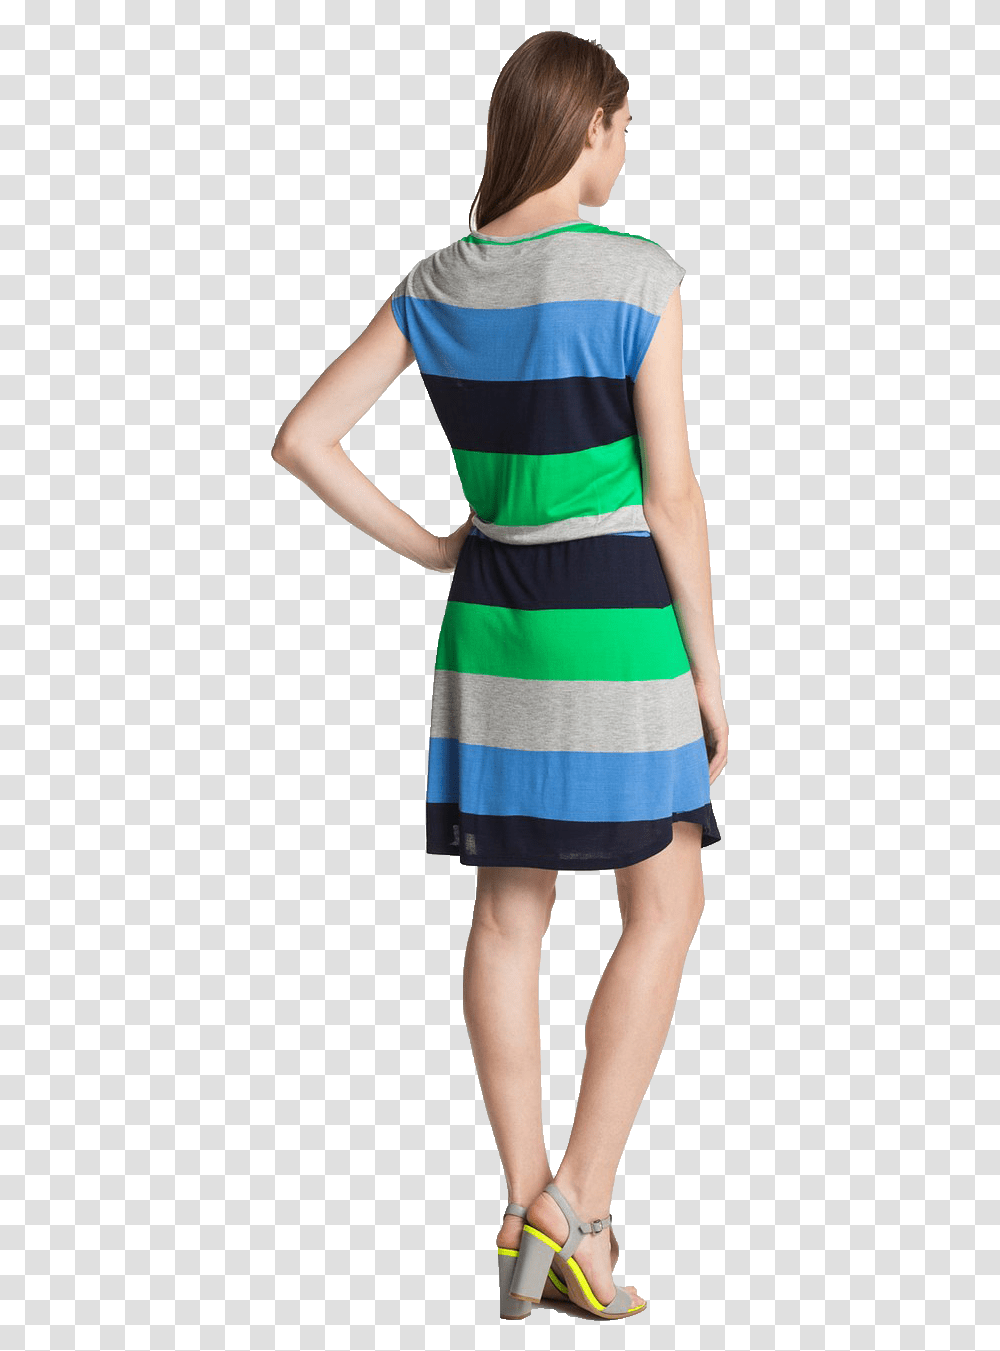 Flores Acuarela Flores Acuarela Woman In Dress On Back, Apparel, Skirt, Person Transparent Png